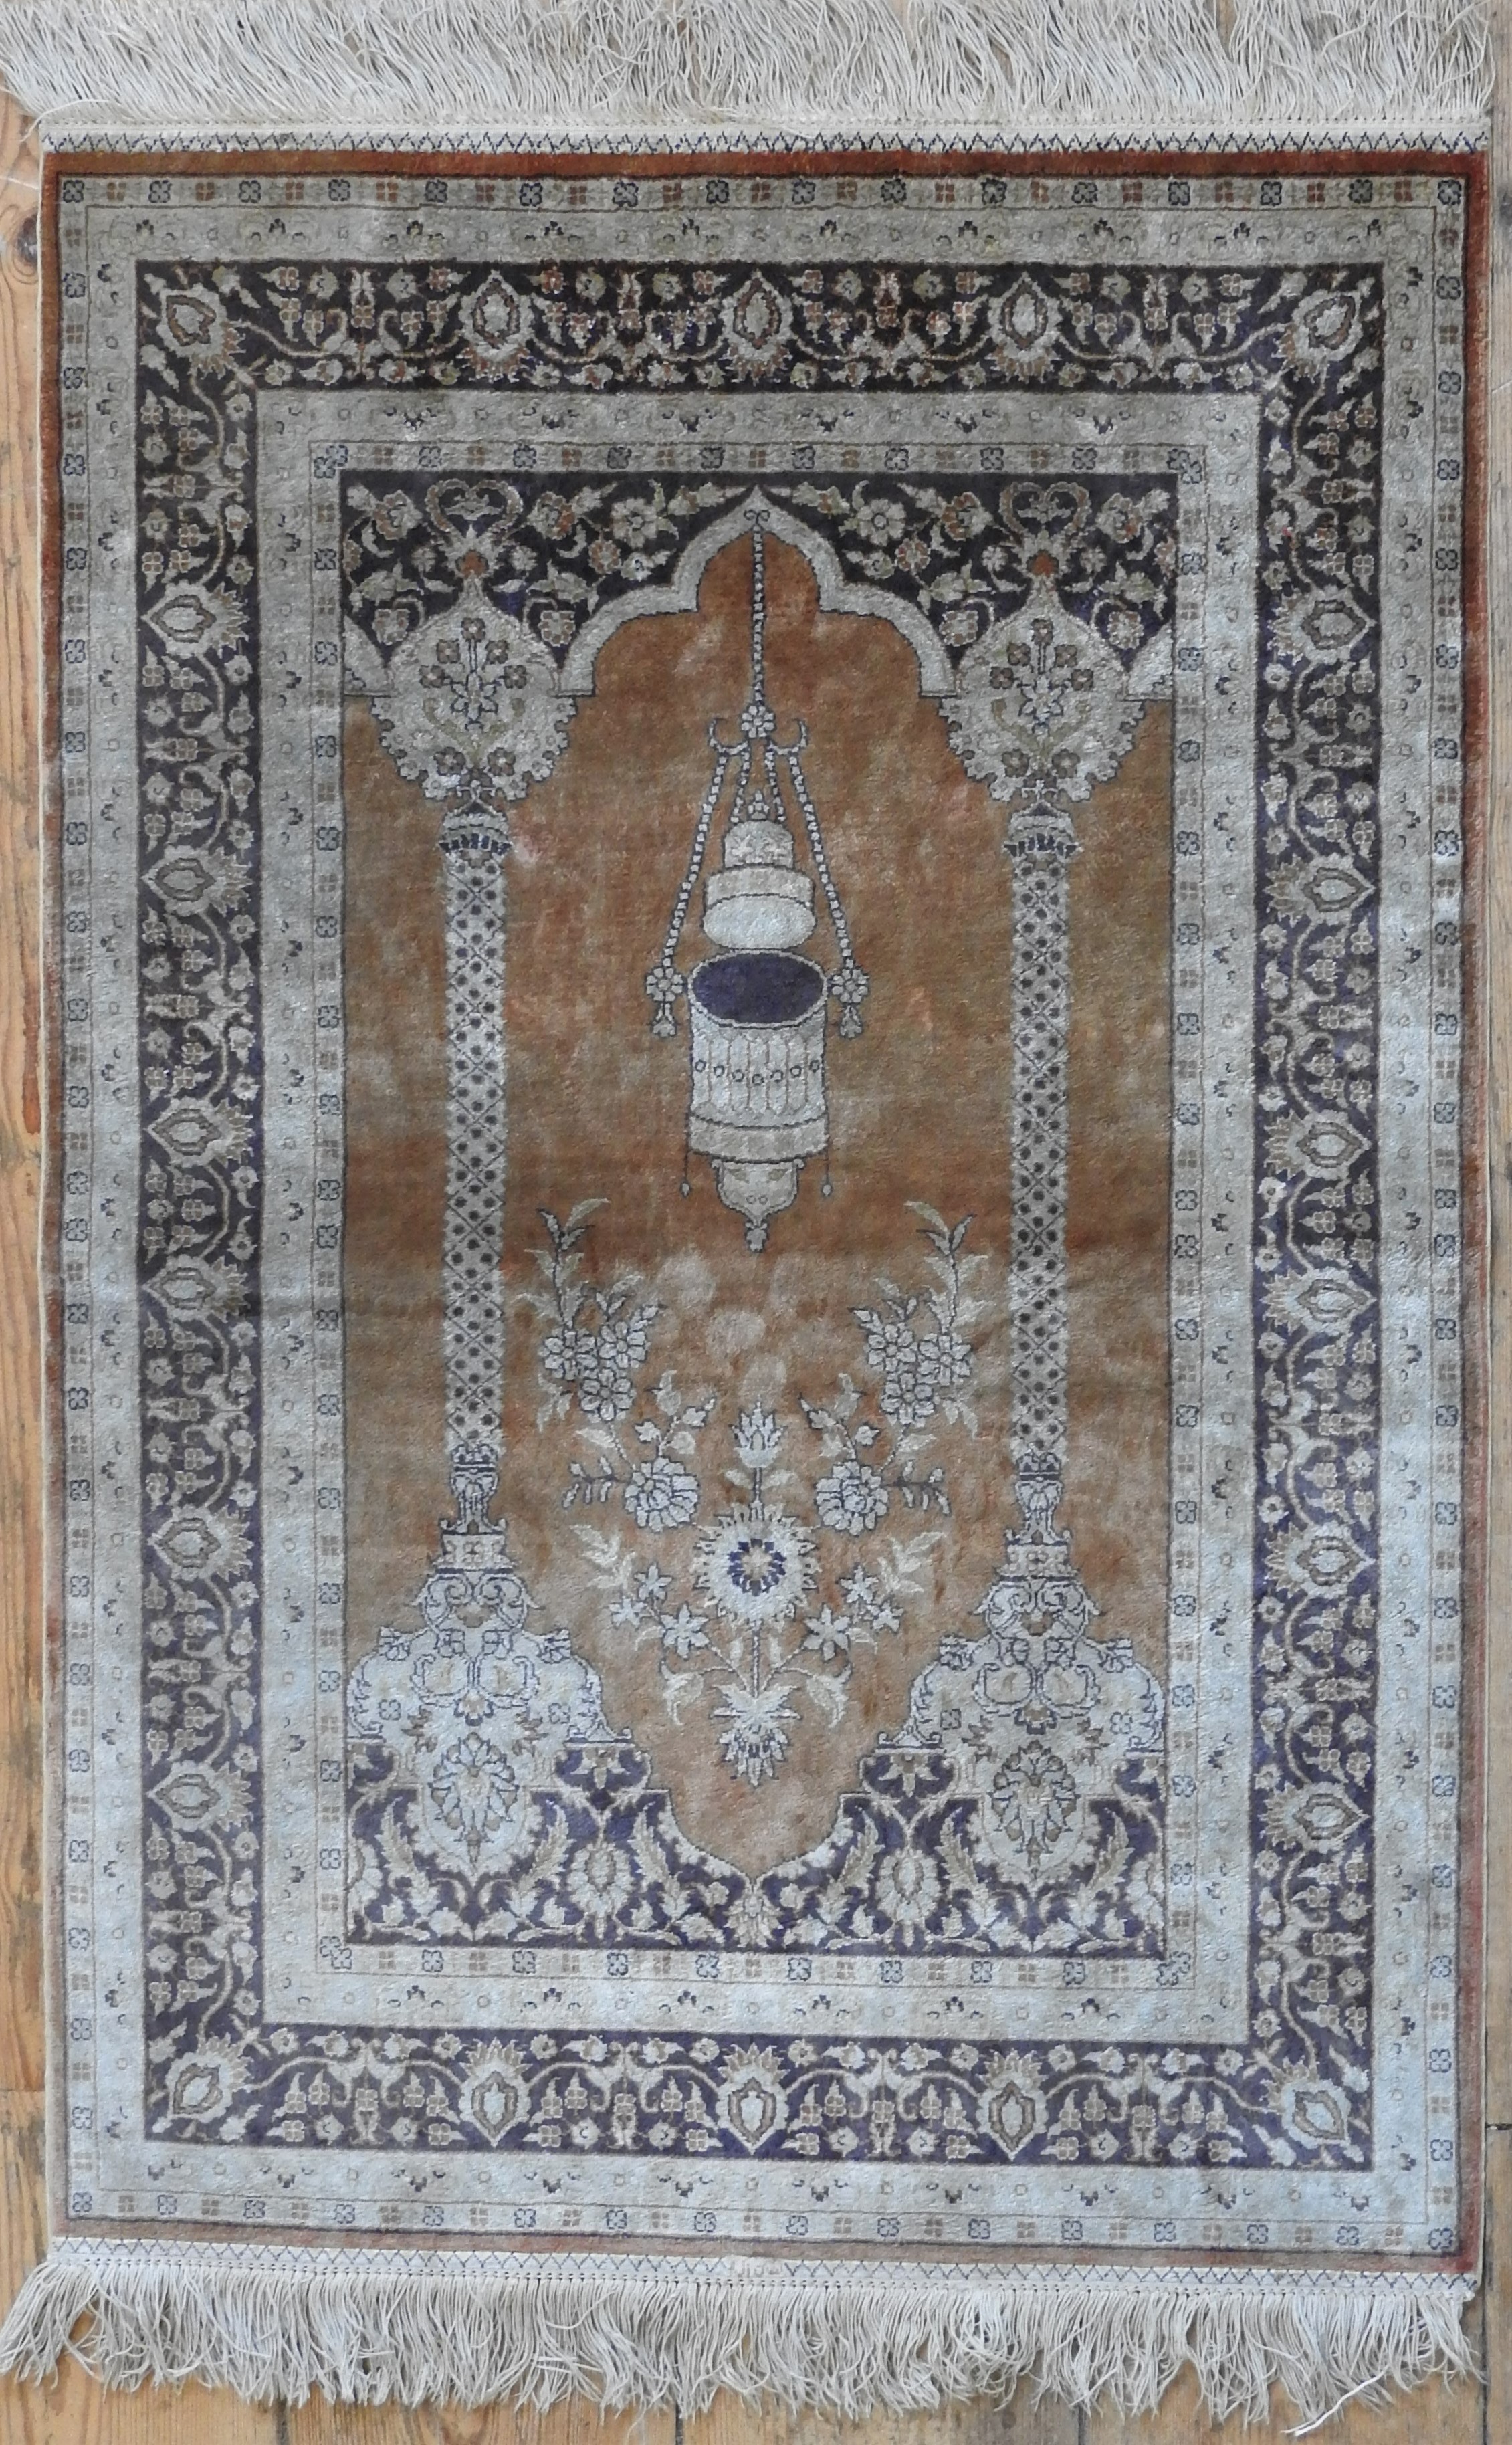 A PERSIAN SILK PRAYER RUG, depiciting temple arch and lantern, on a brown ground 94 x 61 cm